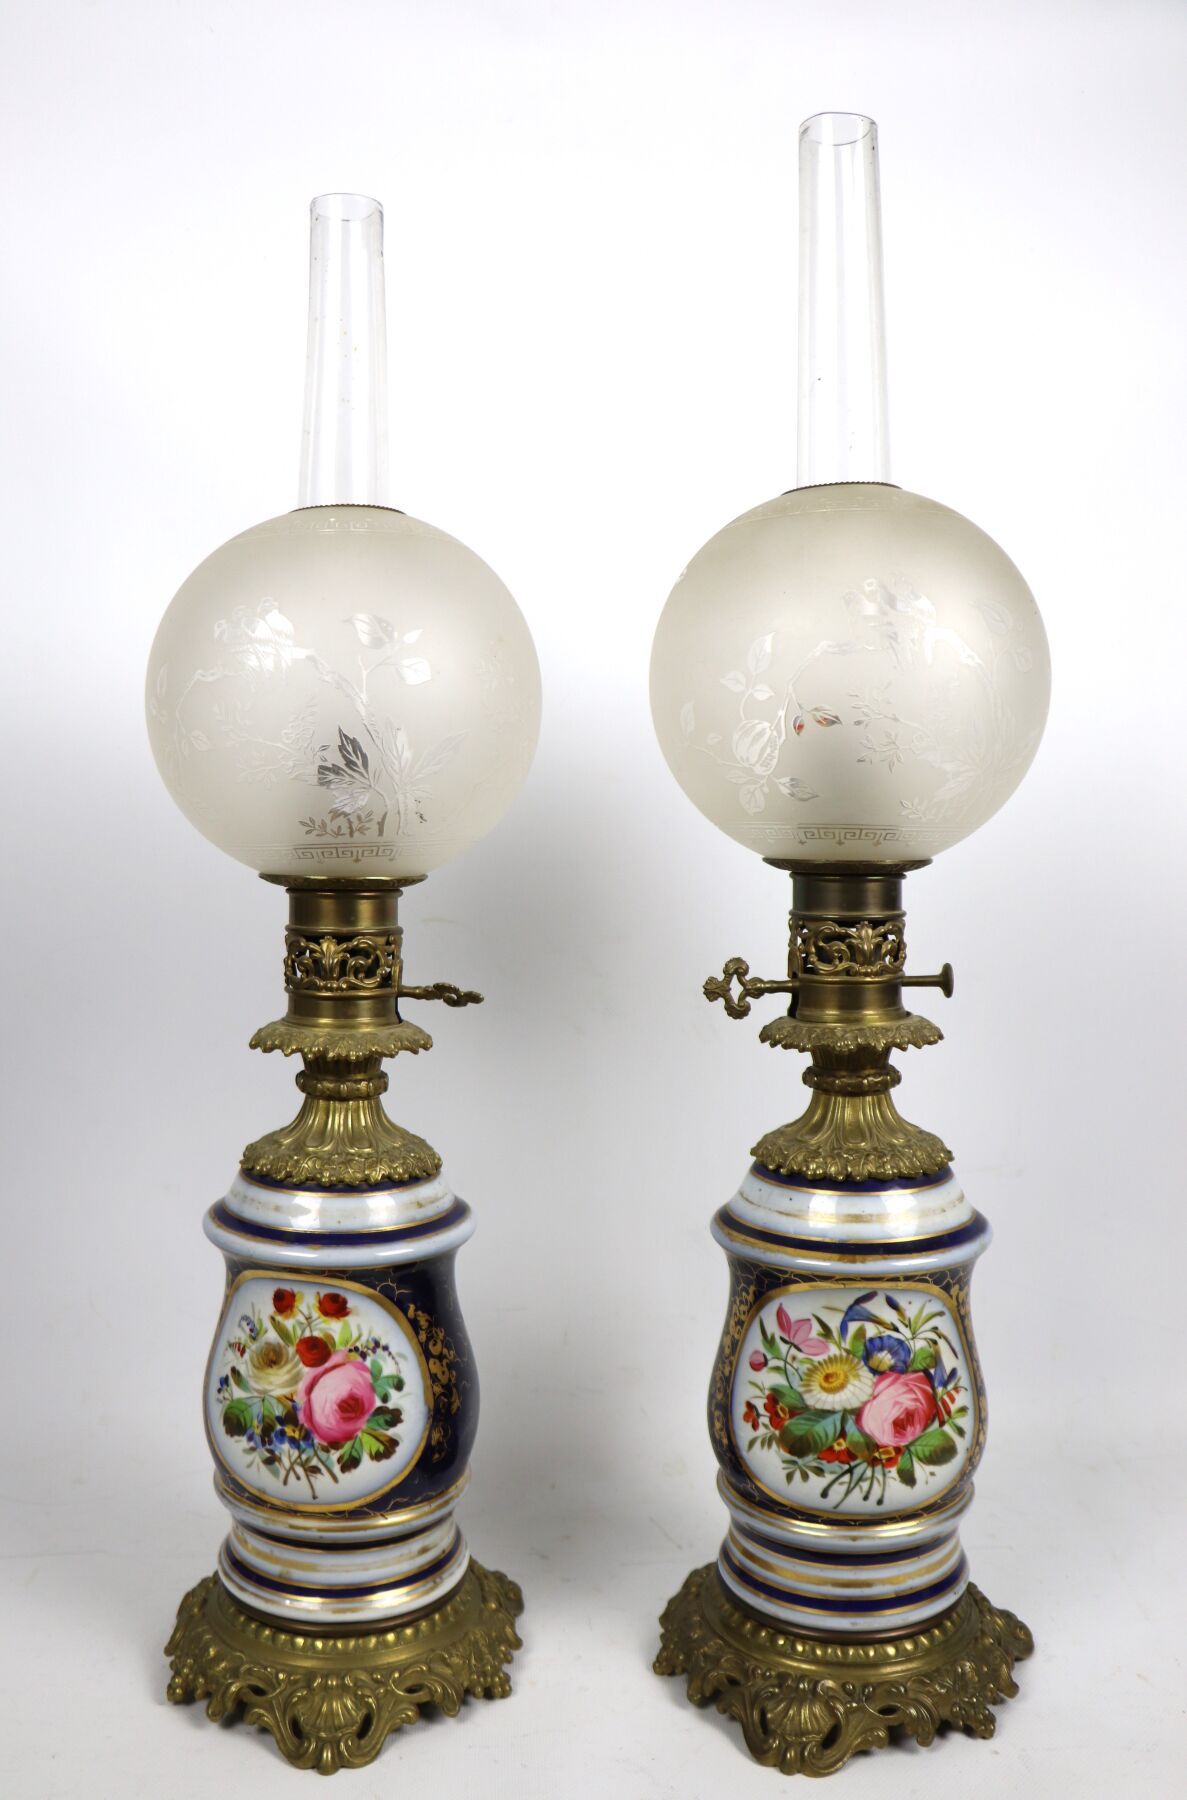 Null VALENTINE or BAYEUX.
Pair of porcelain oil lamps with floral decoration enh&hellip;